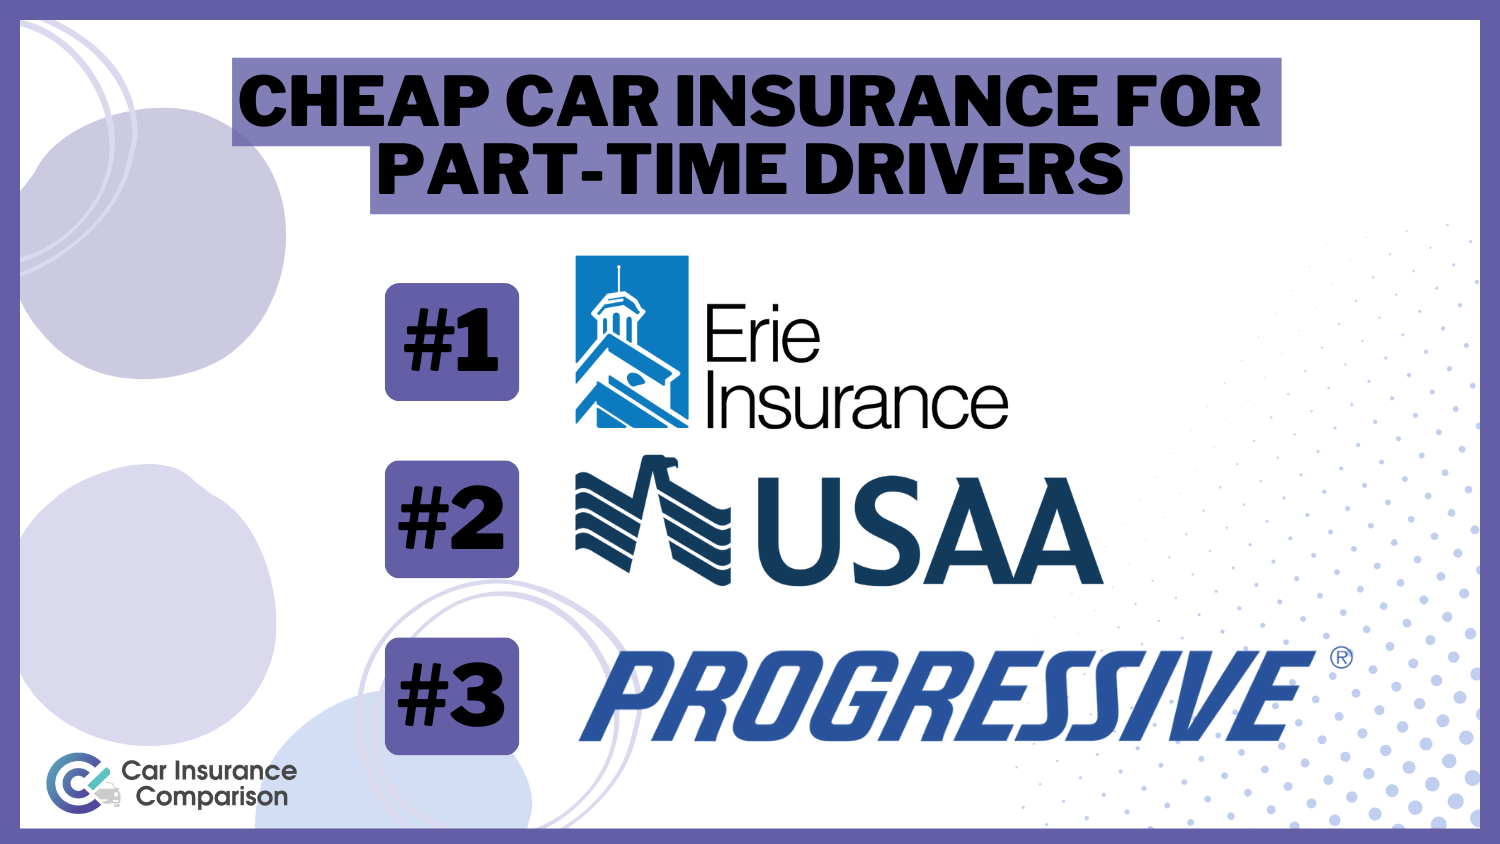 Cheap Car Insurance for Part-Time Drivers: Erie, USAA, and Progressive